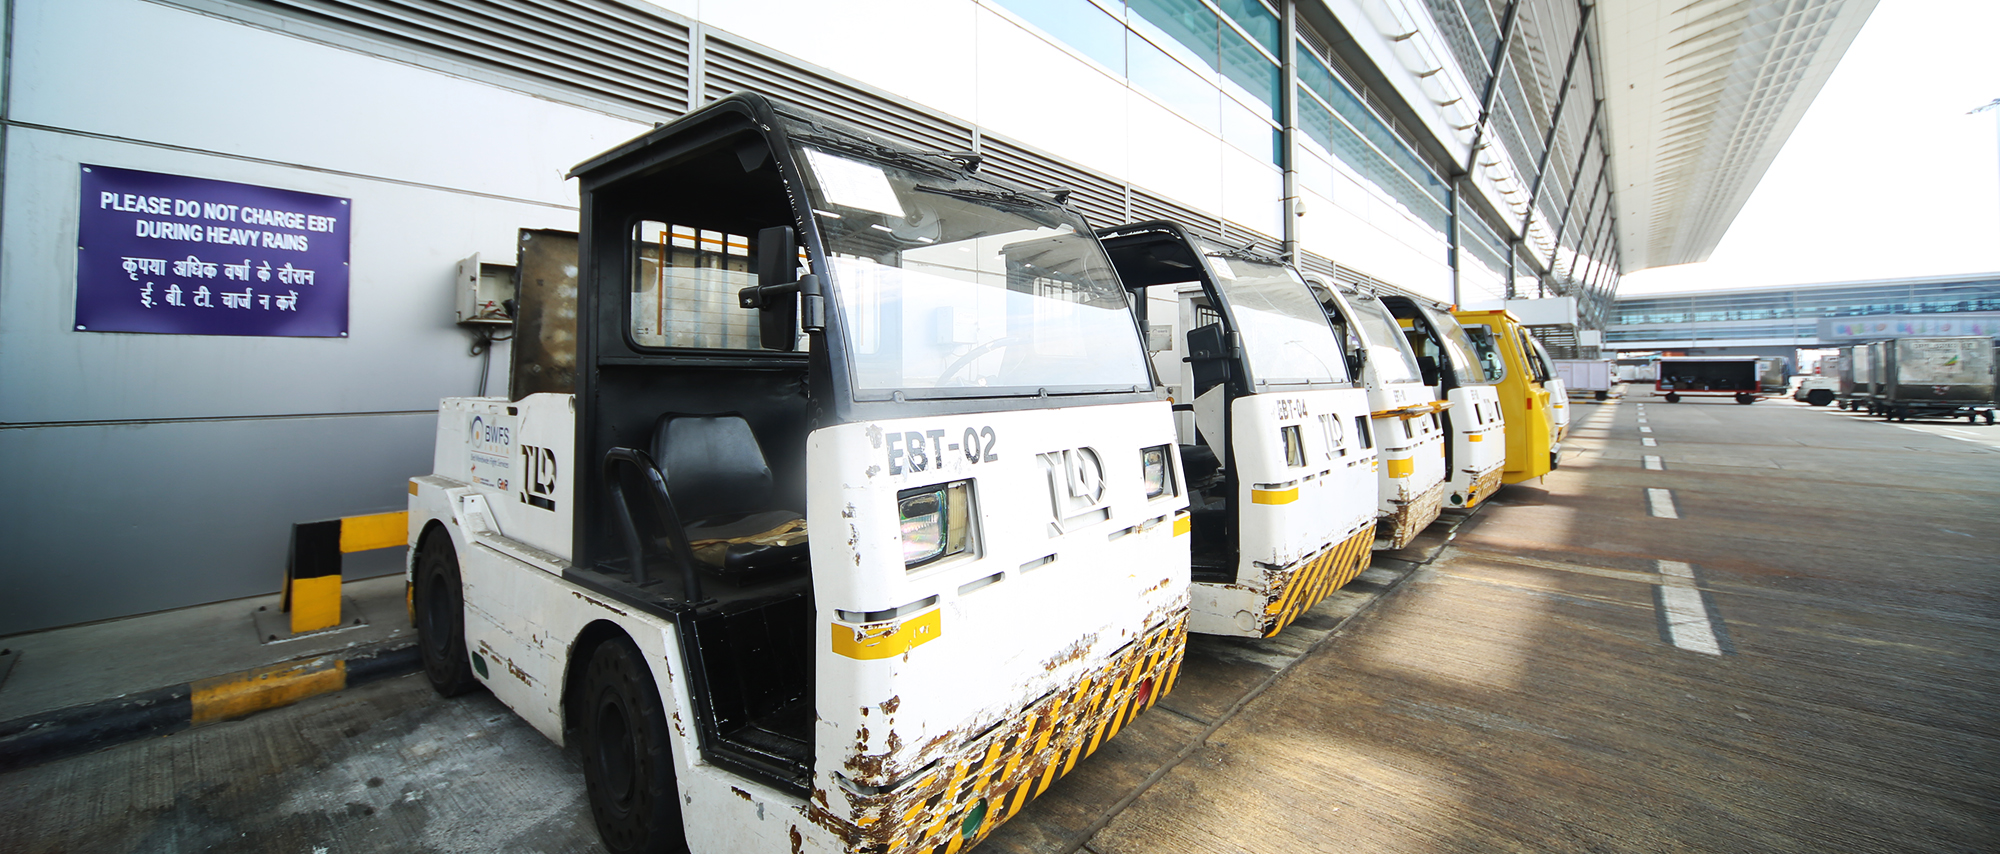 Technology Driven Airside Specialized Vehicle
